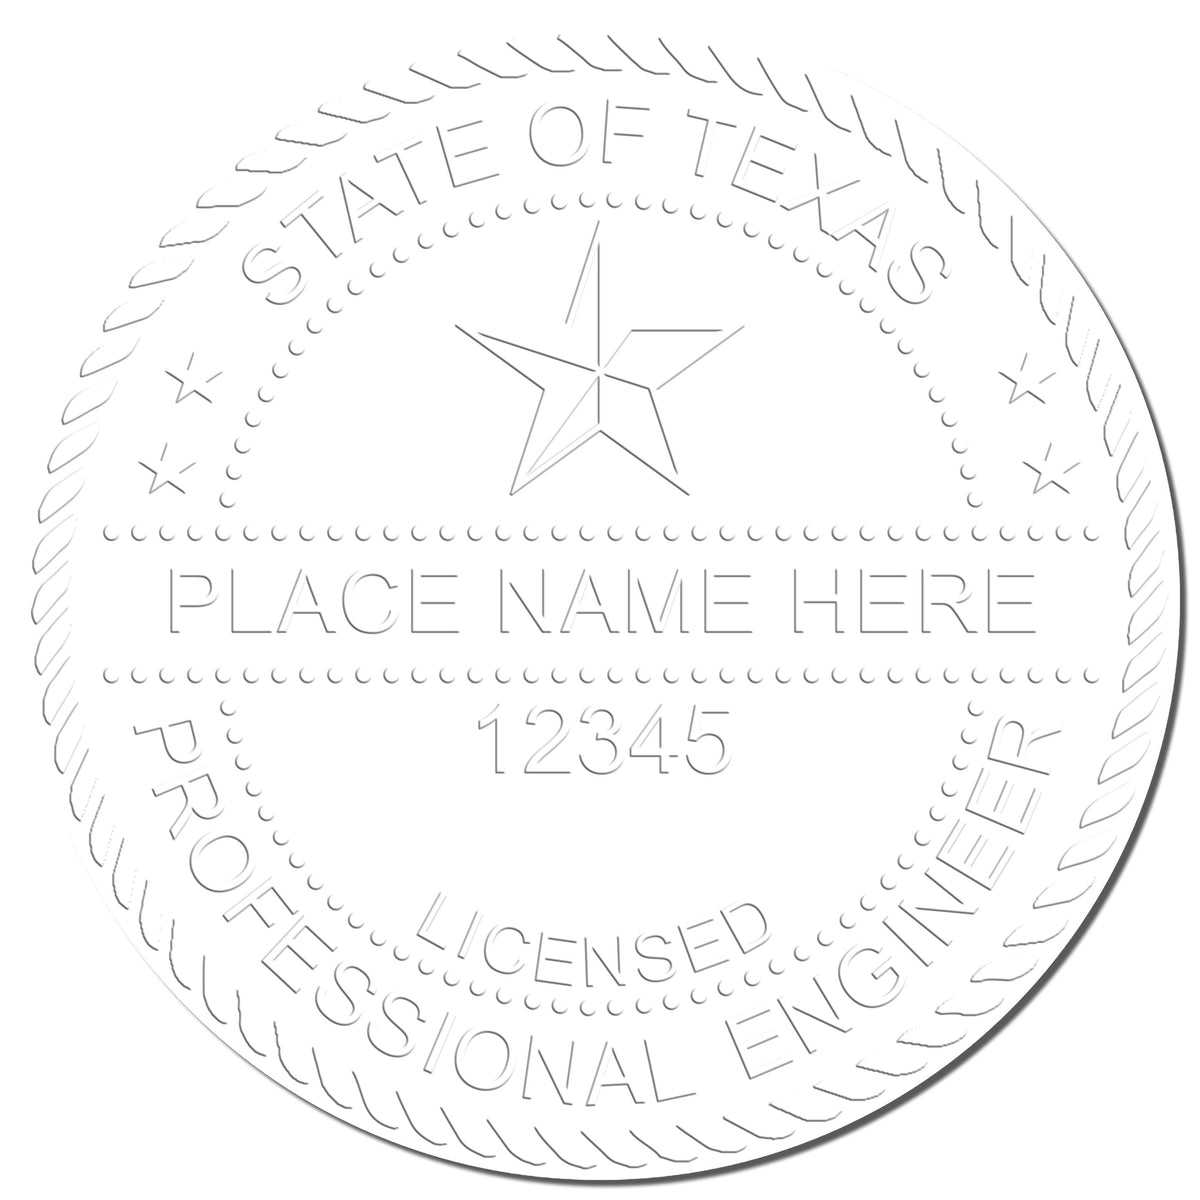 This paper is stamped with a sample imprint of the Hybrid Texas Engineer Seal, signifying its quality and reliability.